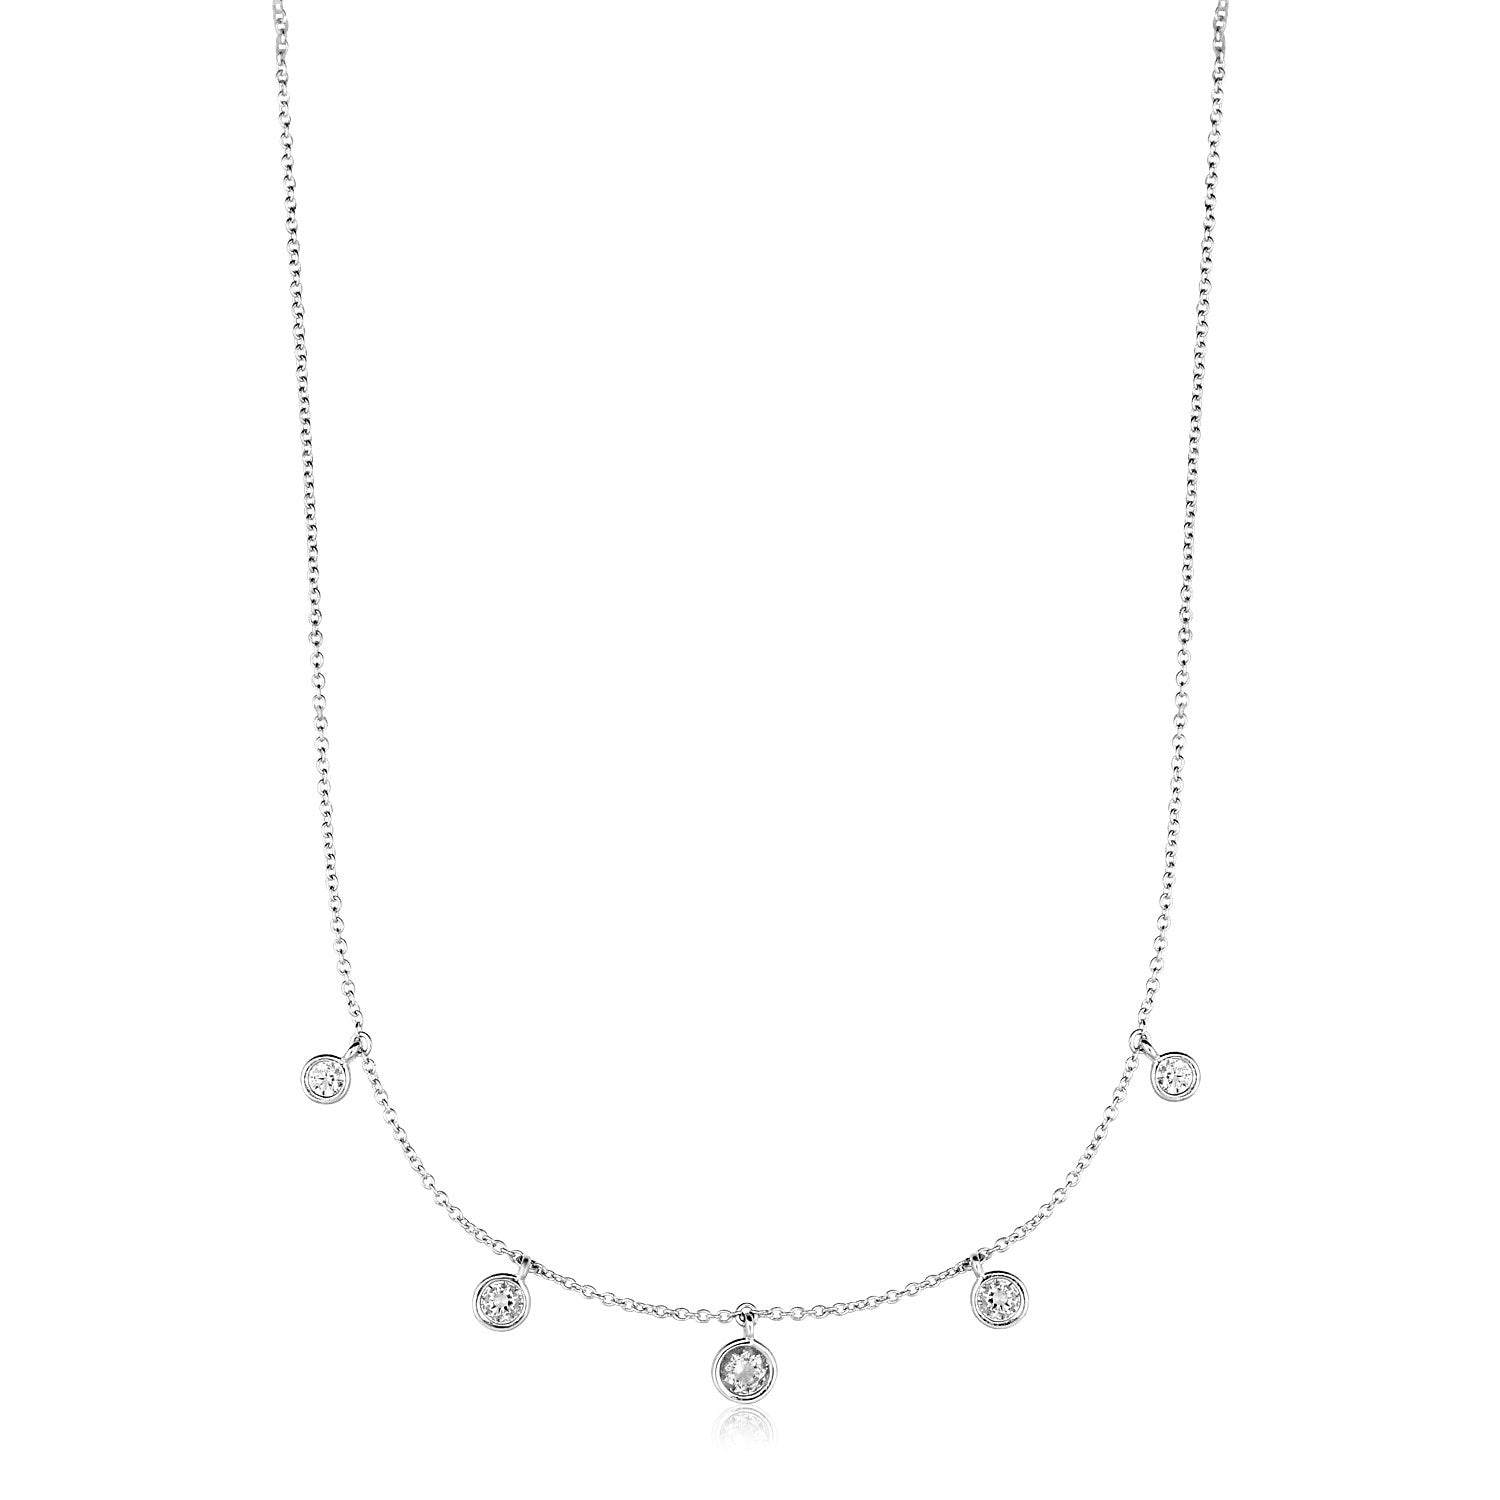 Sterling Silver Necklace with Cubic Zirconia Dangles